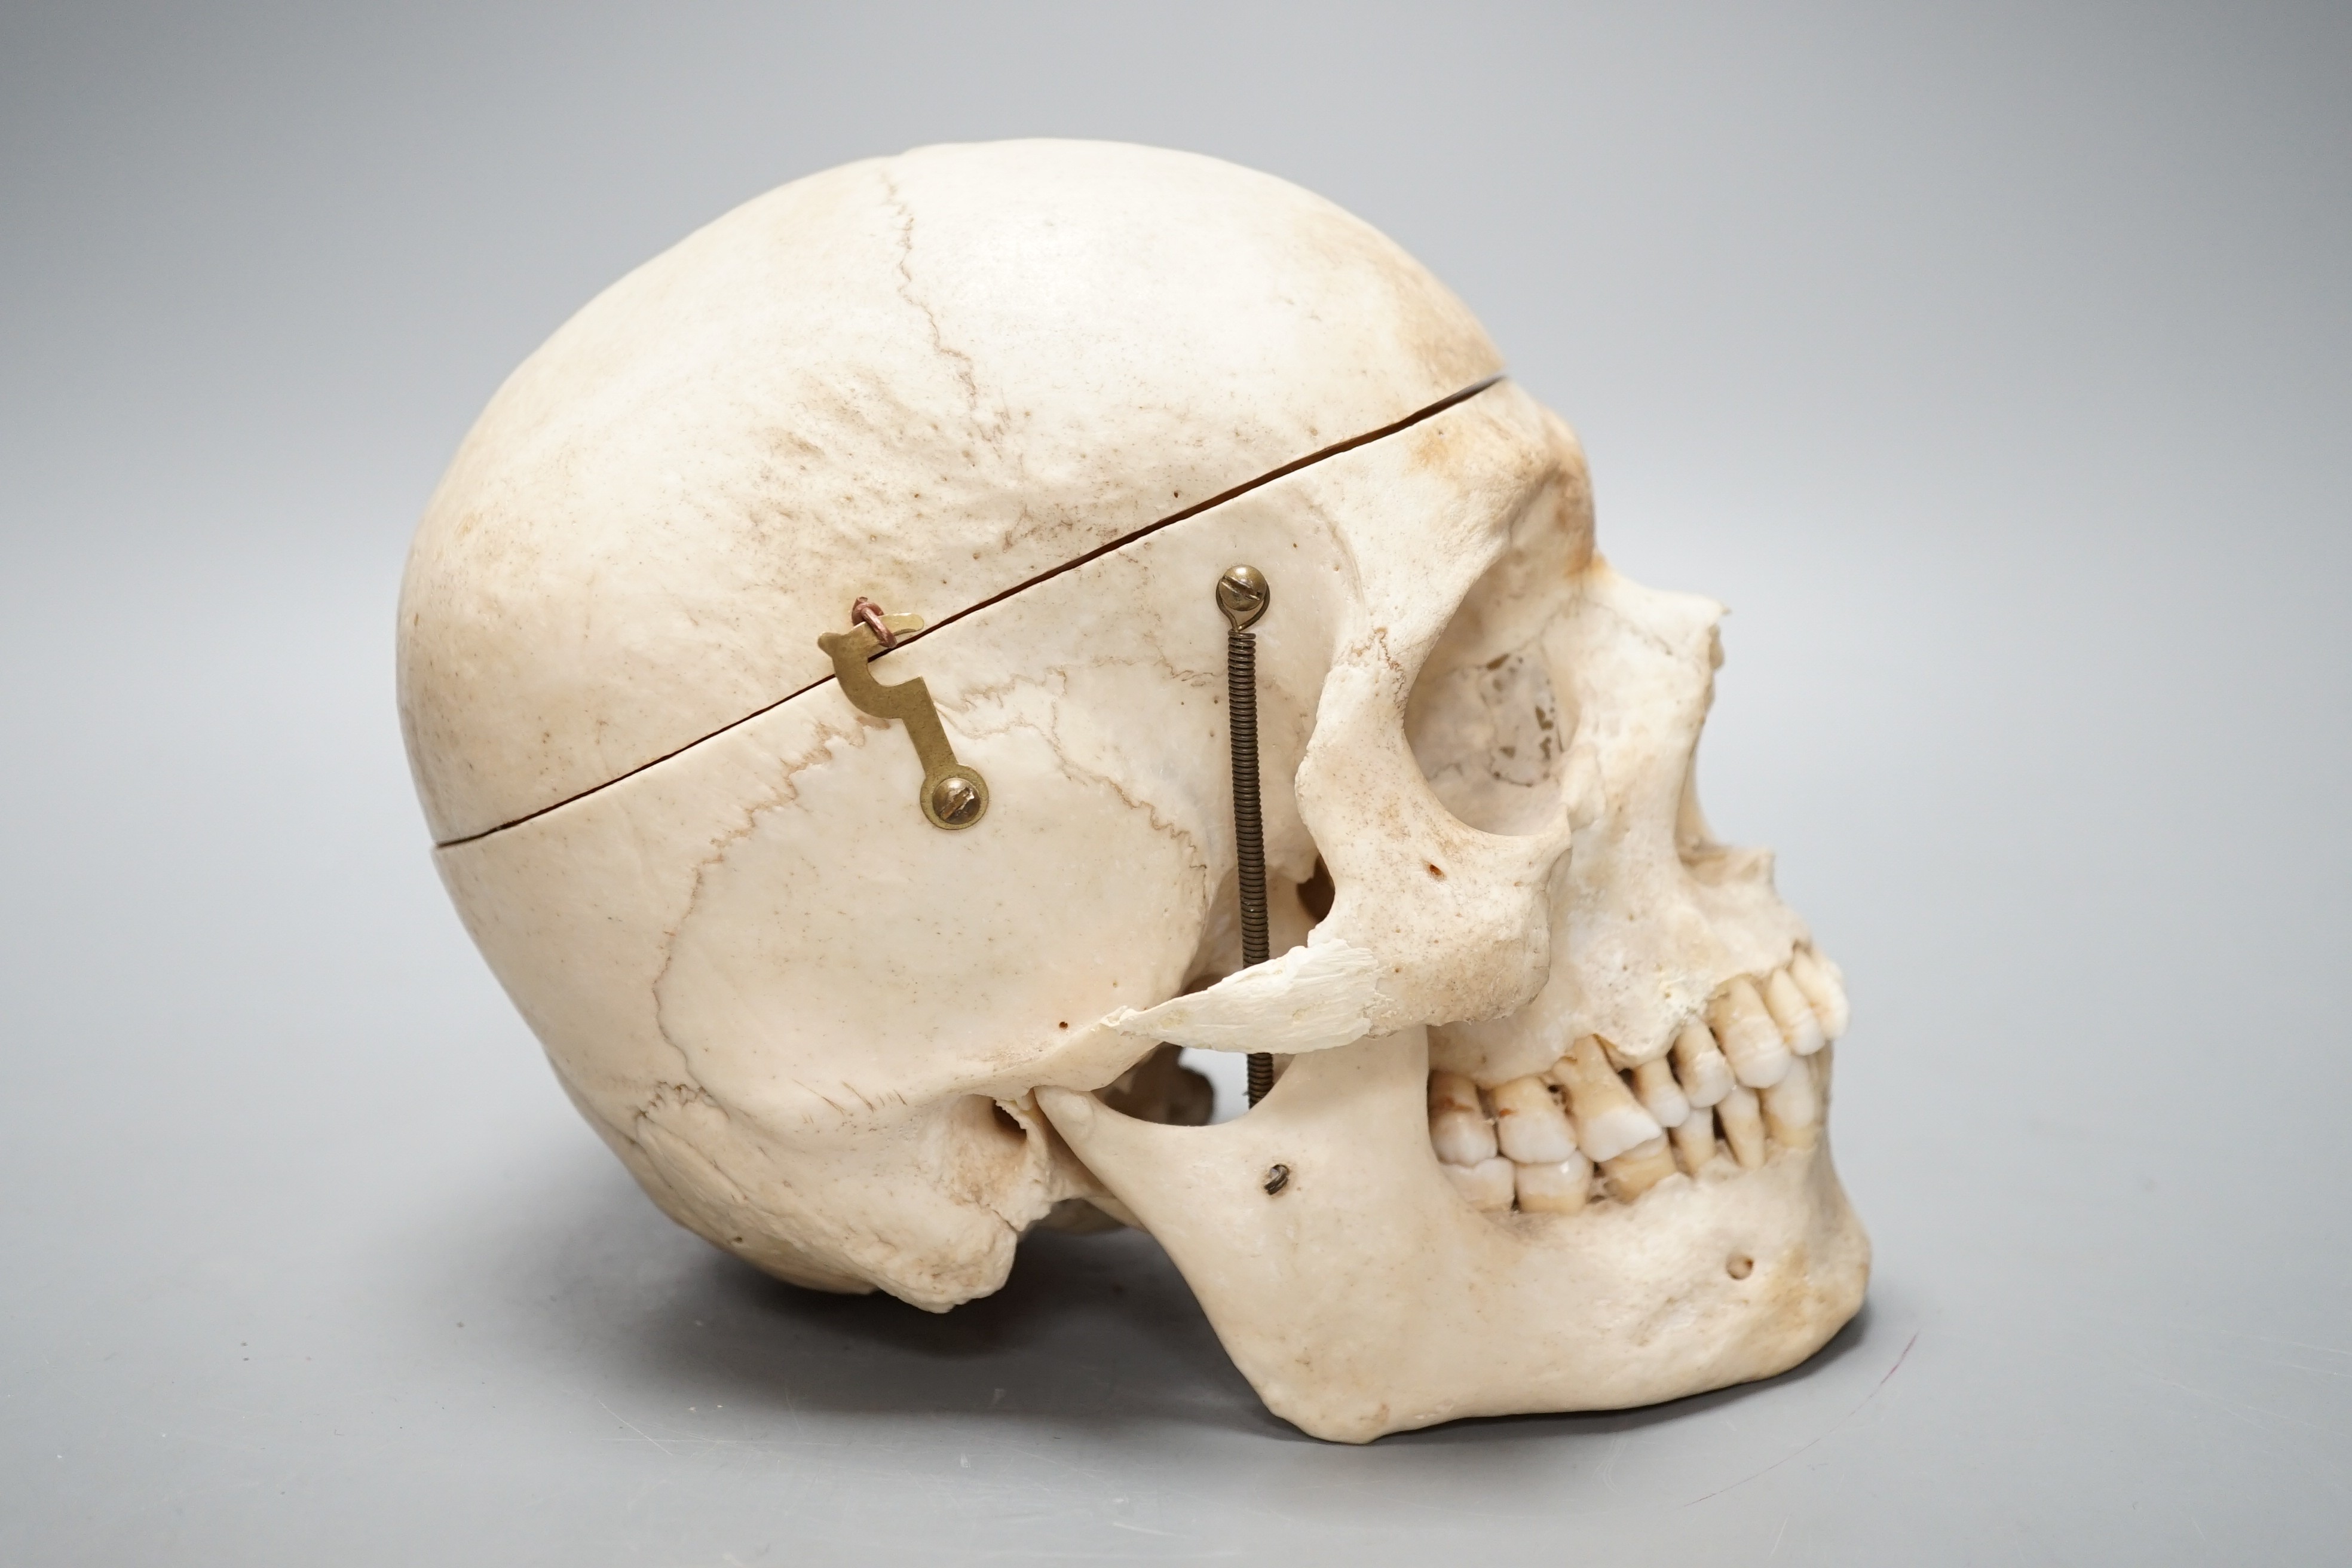 A human skull with removable cranium and spring loaded jaw 15.5cm